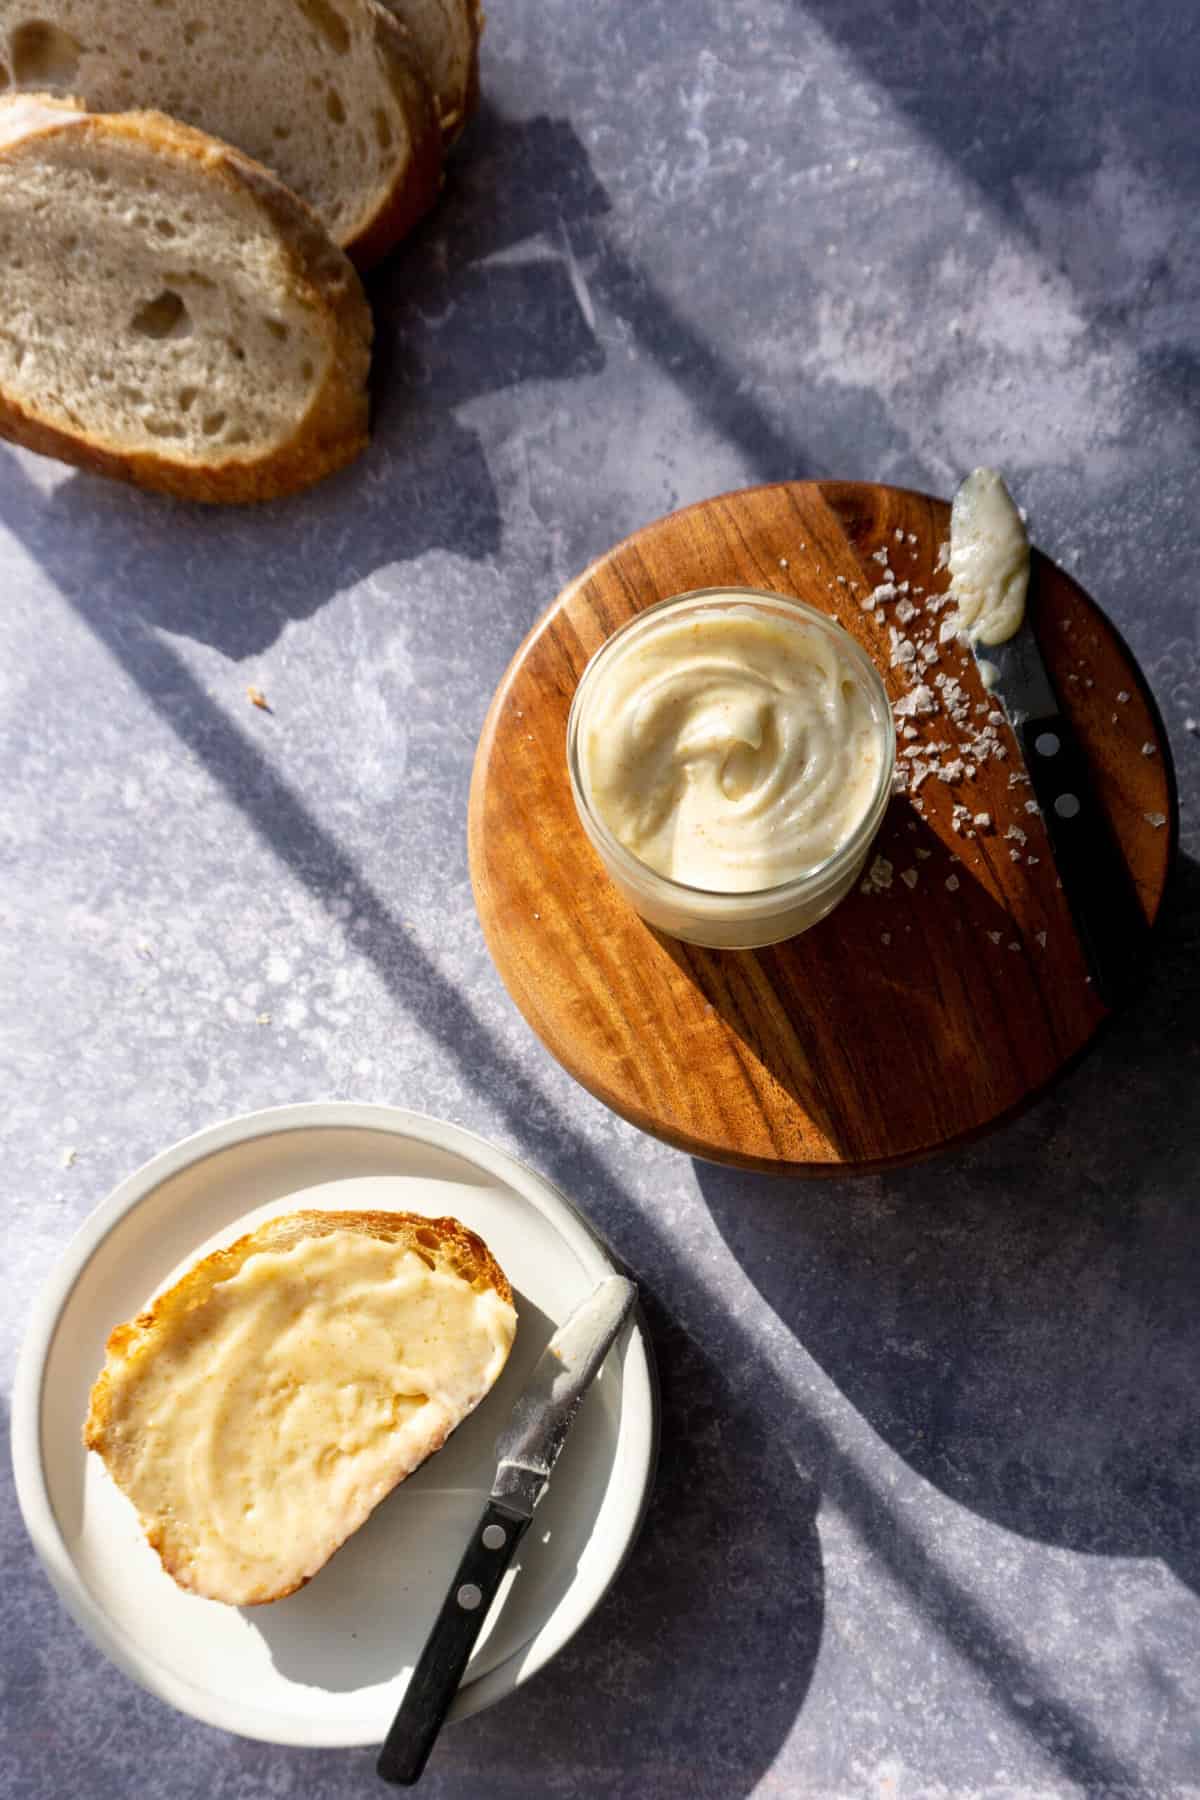 a container of whipped brown butter sits on top of a small wooden stand in the center of the photo, with a loaf of sourdough bread in the top left corner and a slice of buttered sourdough toast in the bottom left corner.